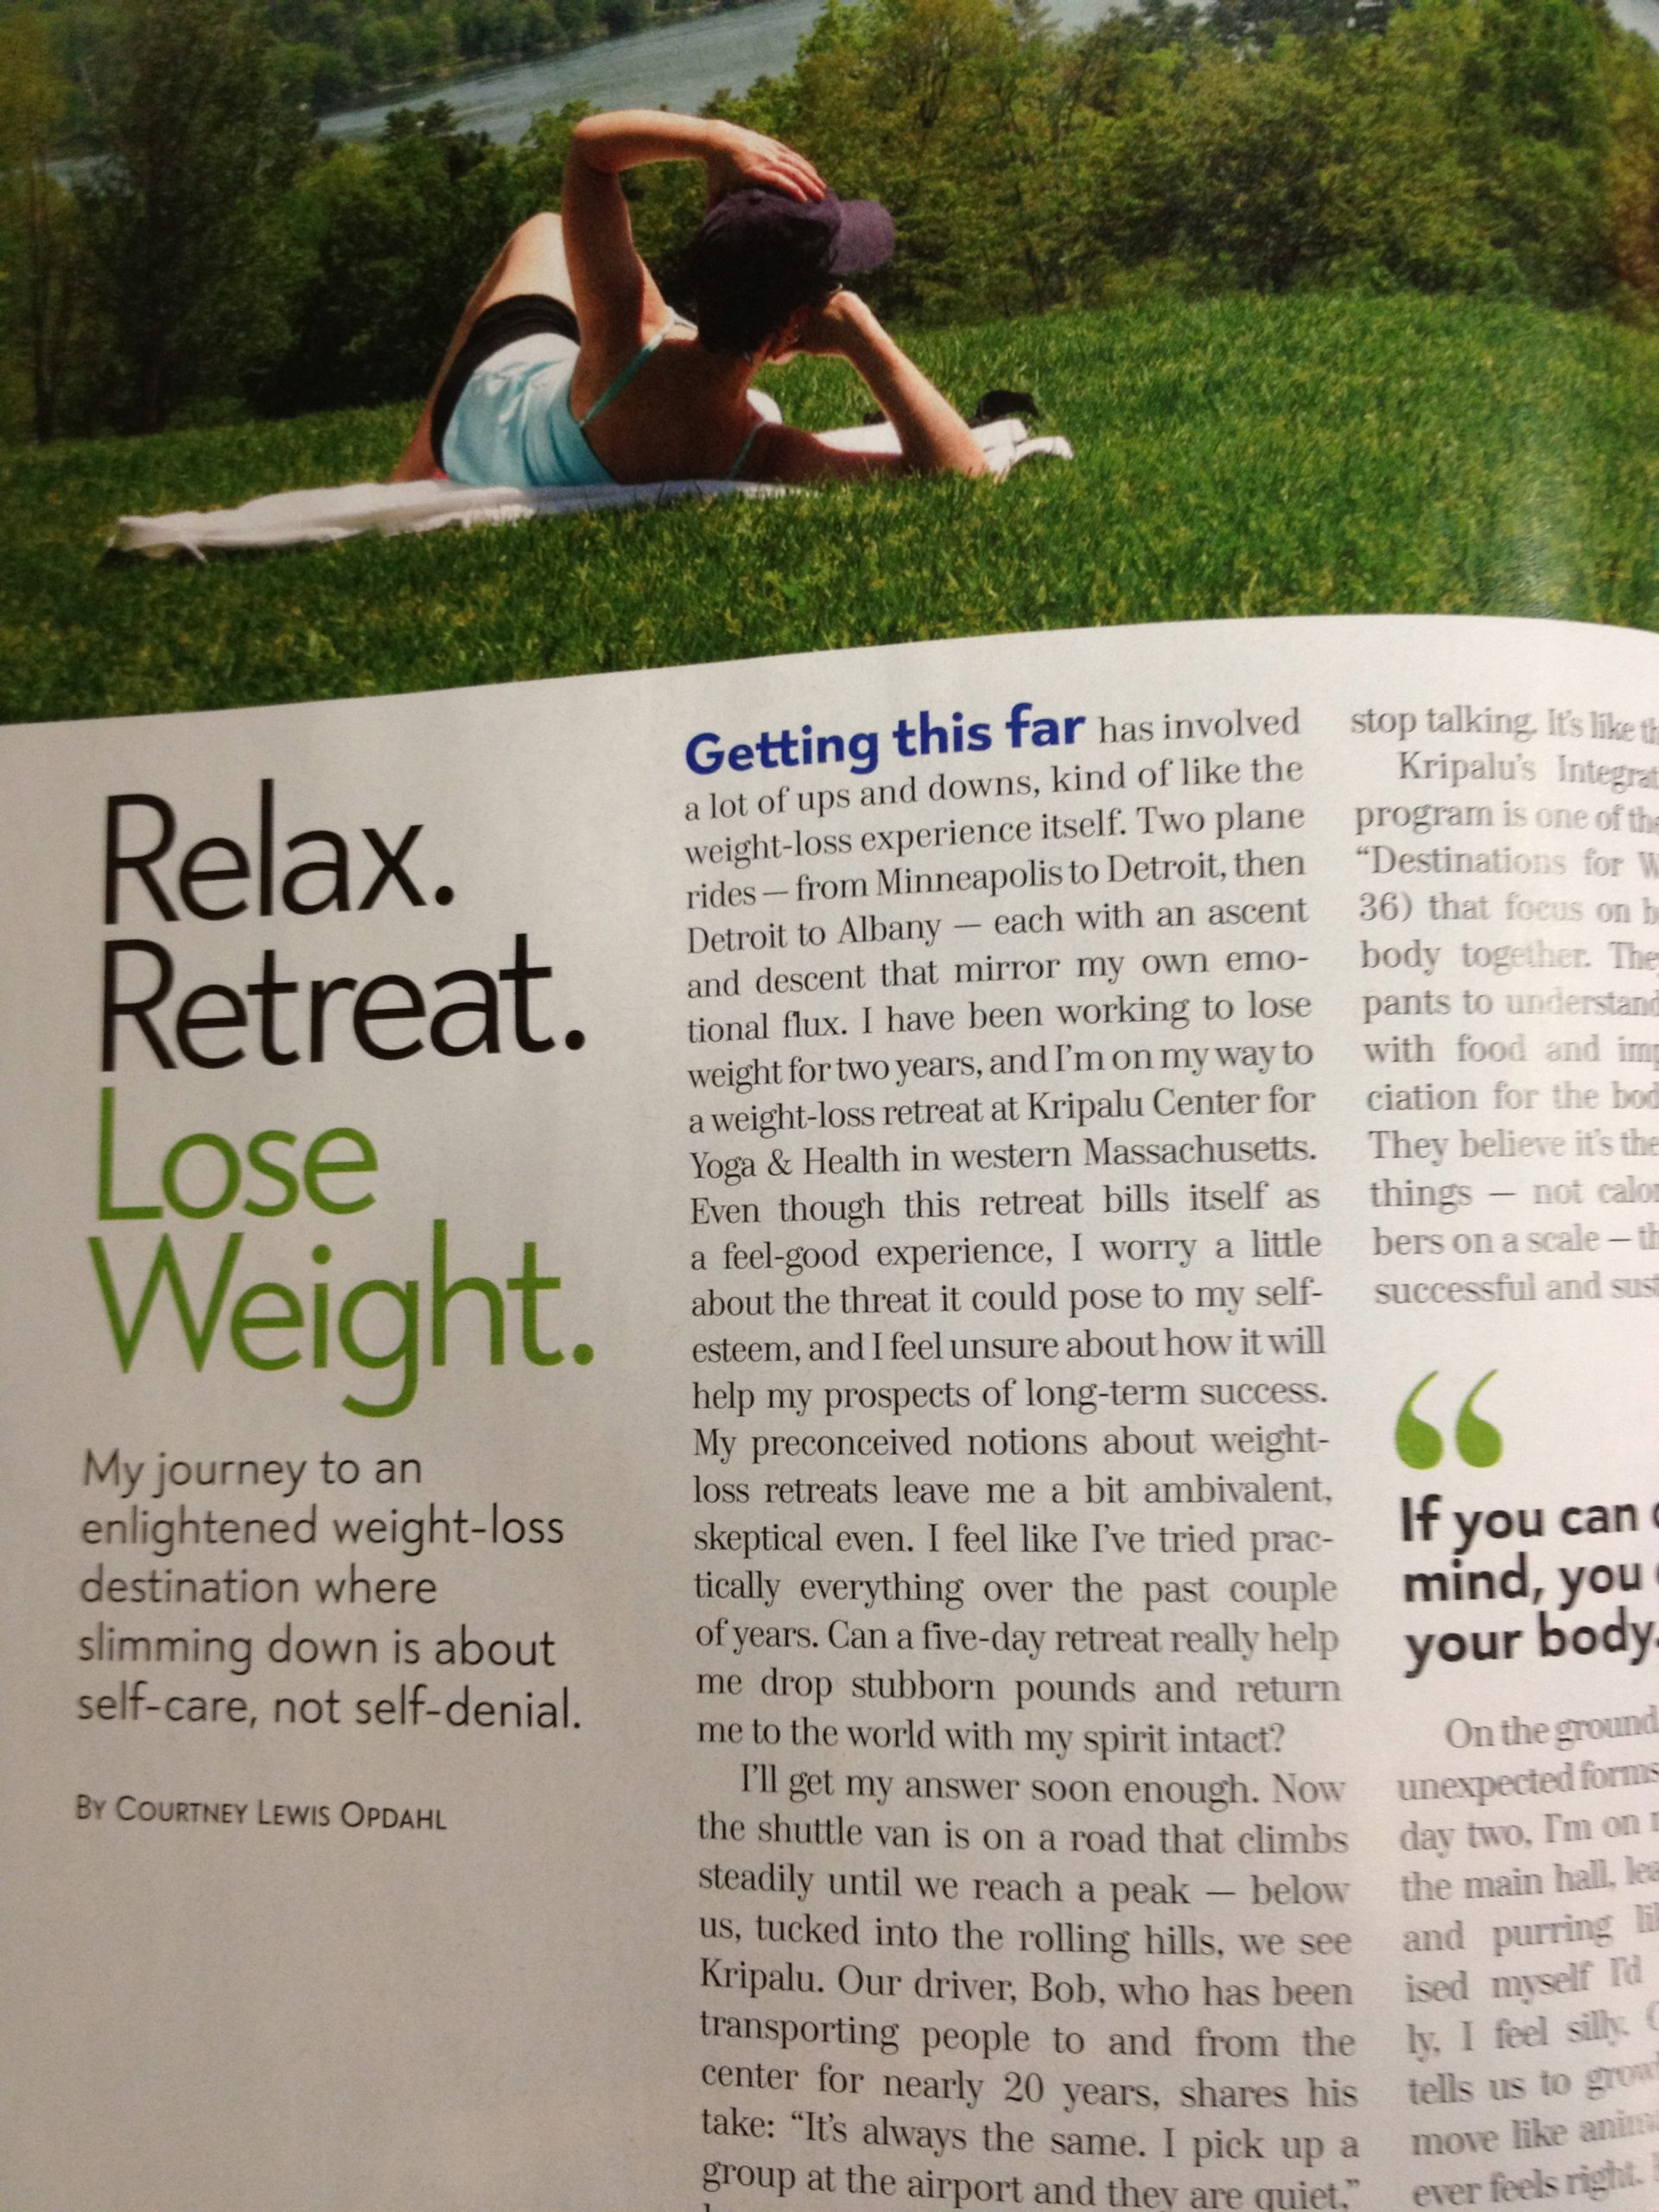 Relax. Retreat. Lose Weight.